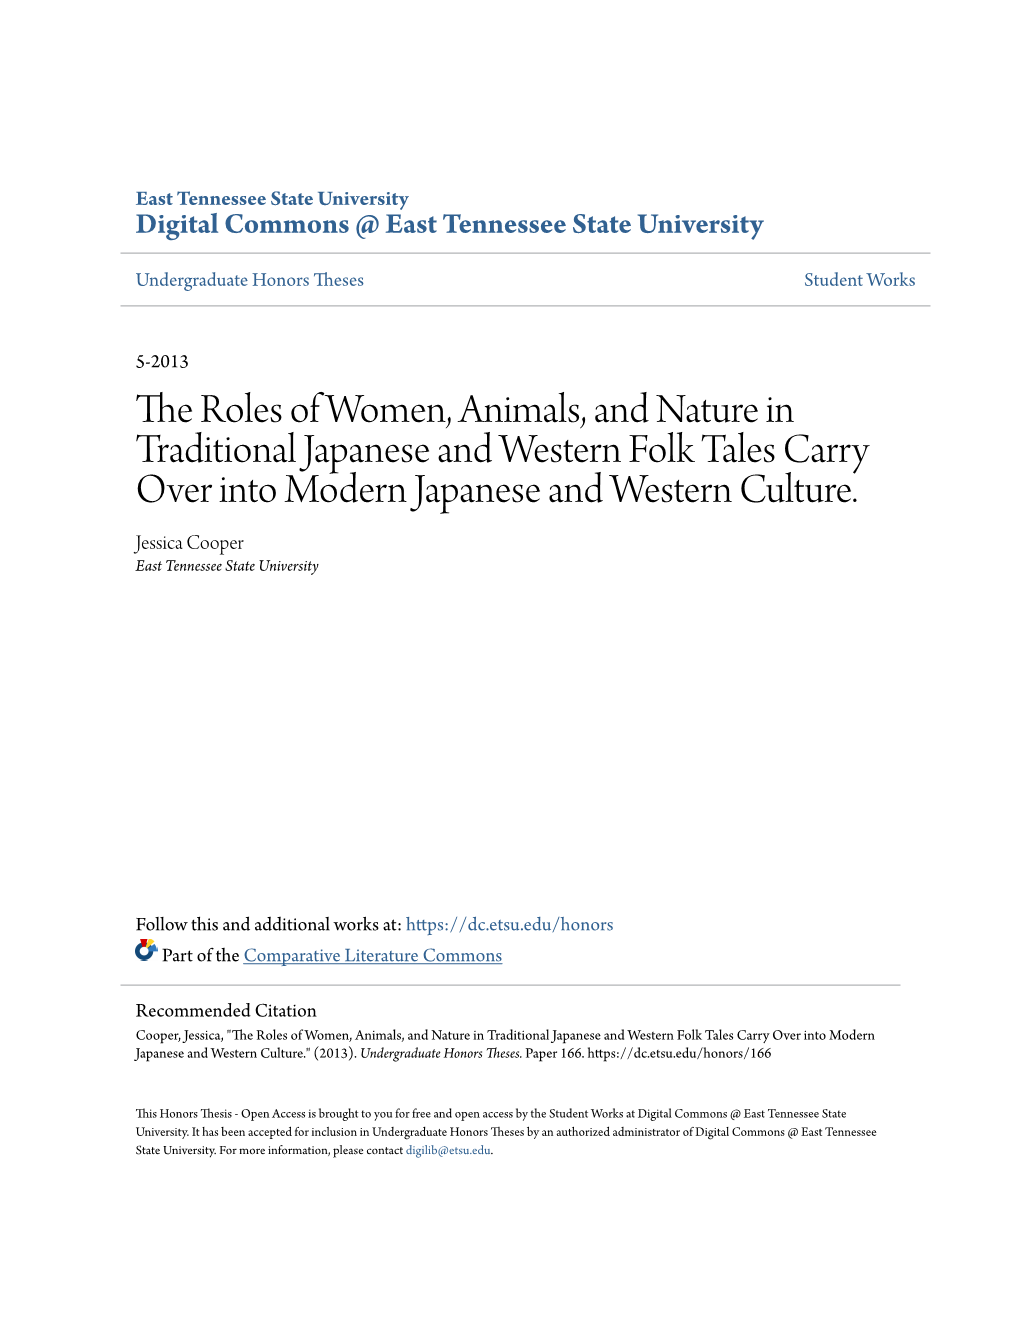 The Roles of Women, Animals, and Nature in Traditional Japanese and Western Folk Tales Carry Over Into Modern Japanese and Western Culture